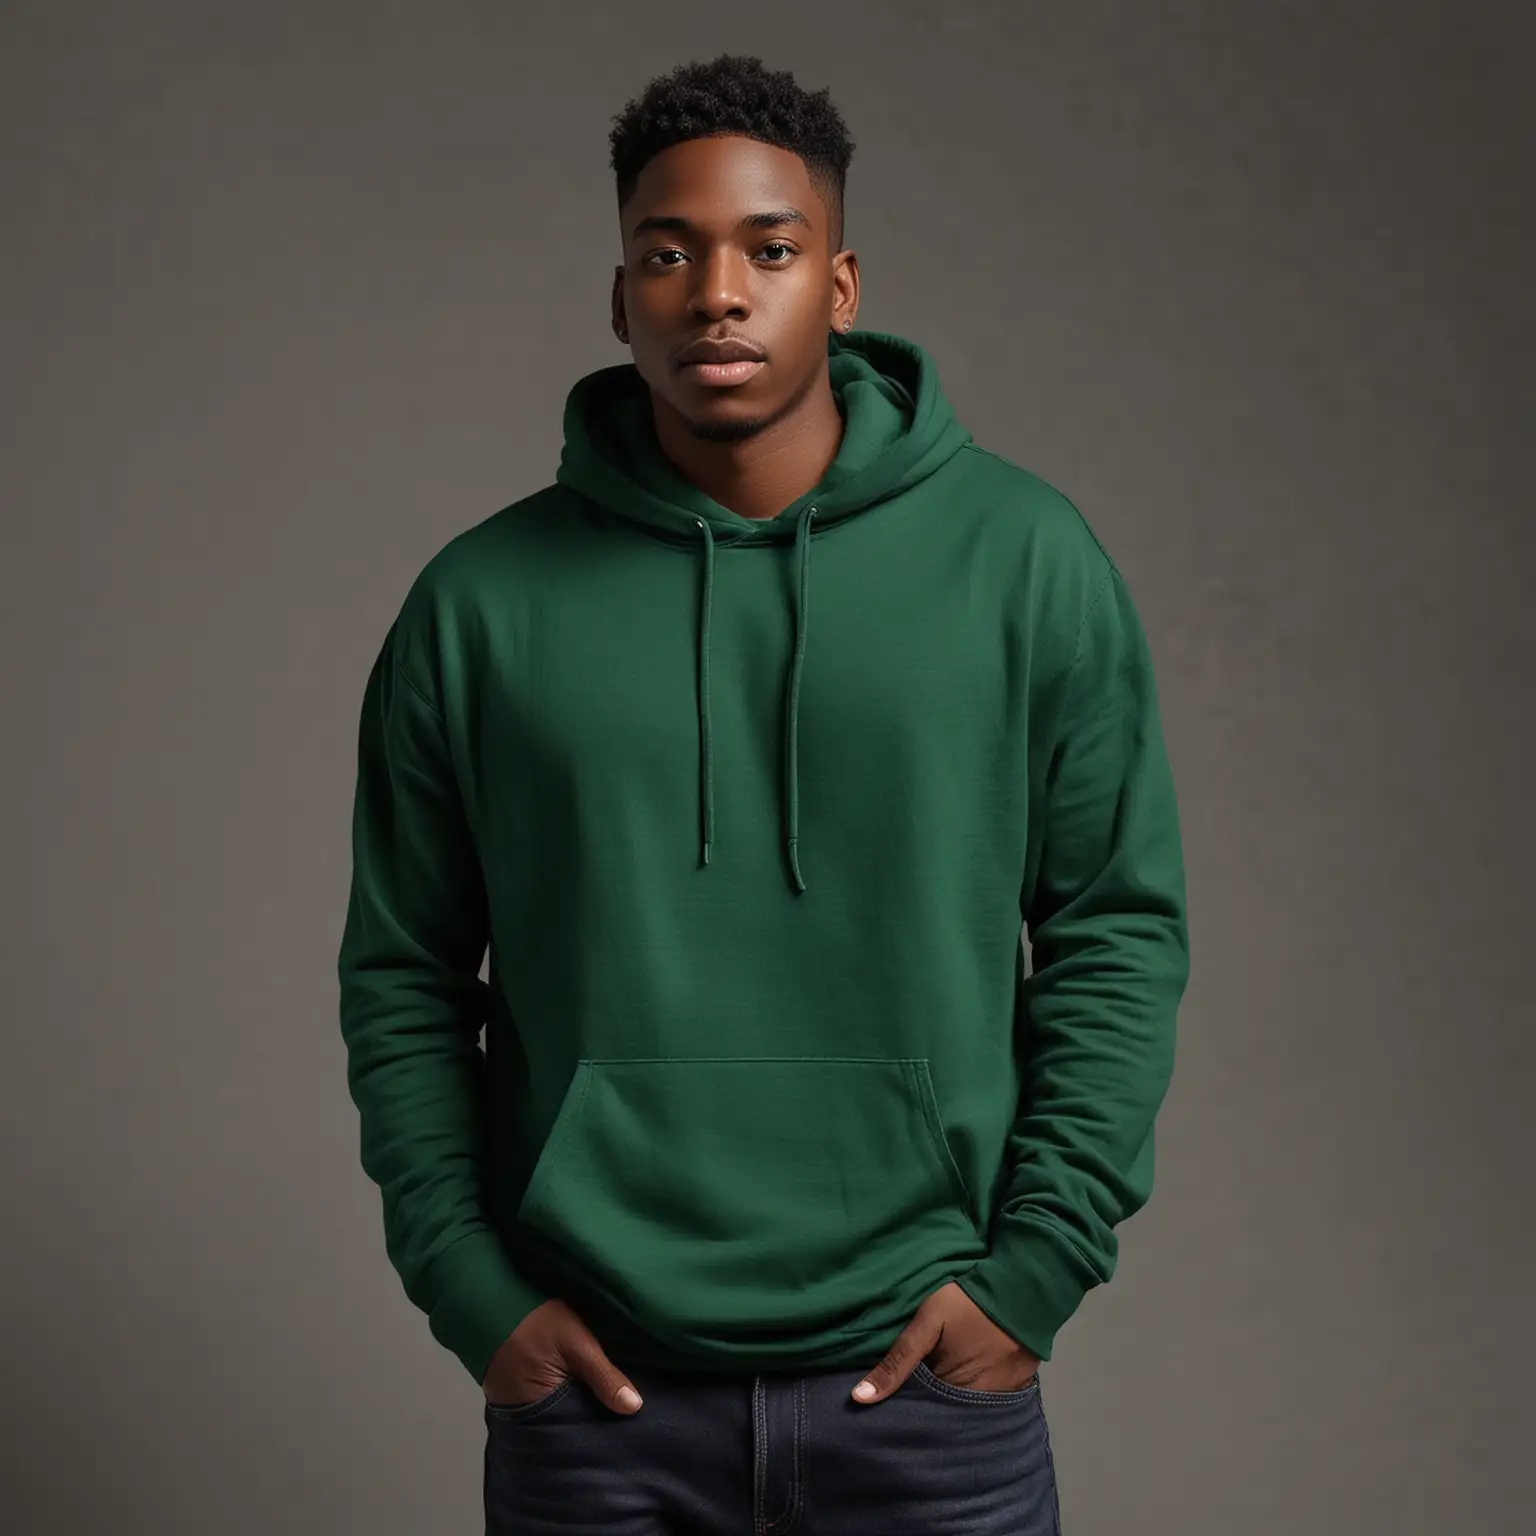 Stylish Black Person in Emerald Green Tee Shirt and Hoodie